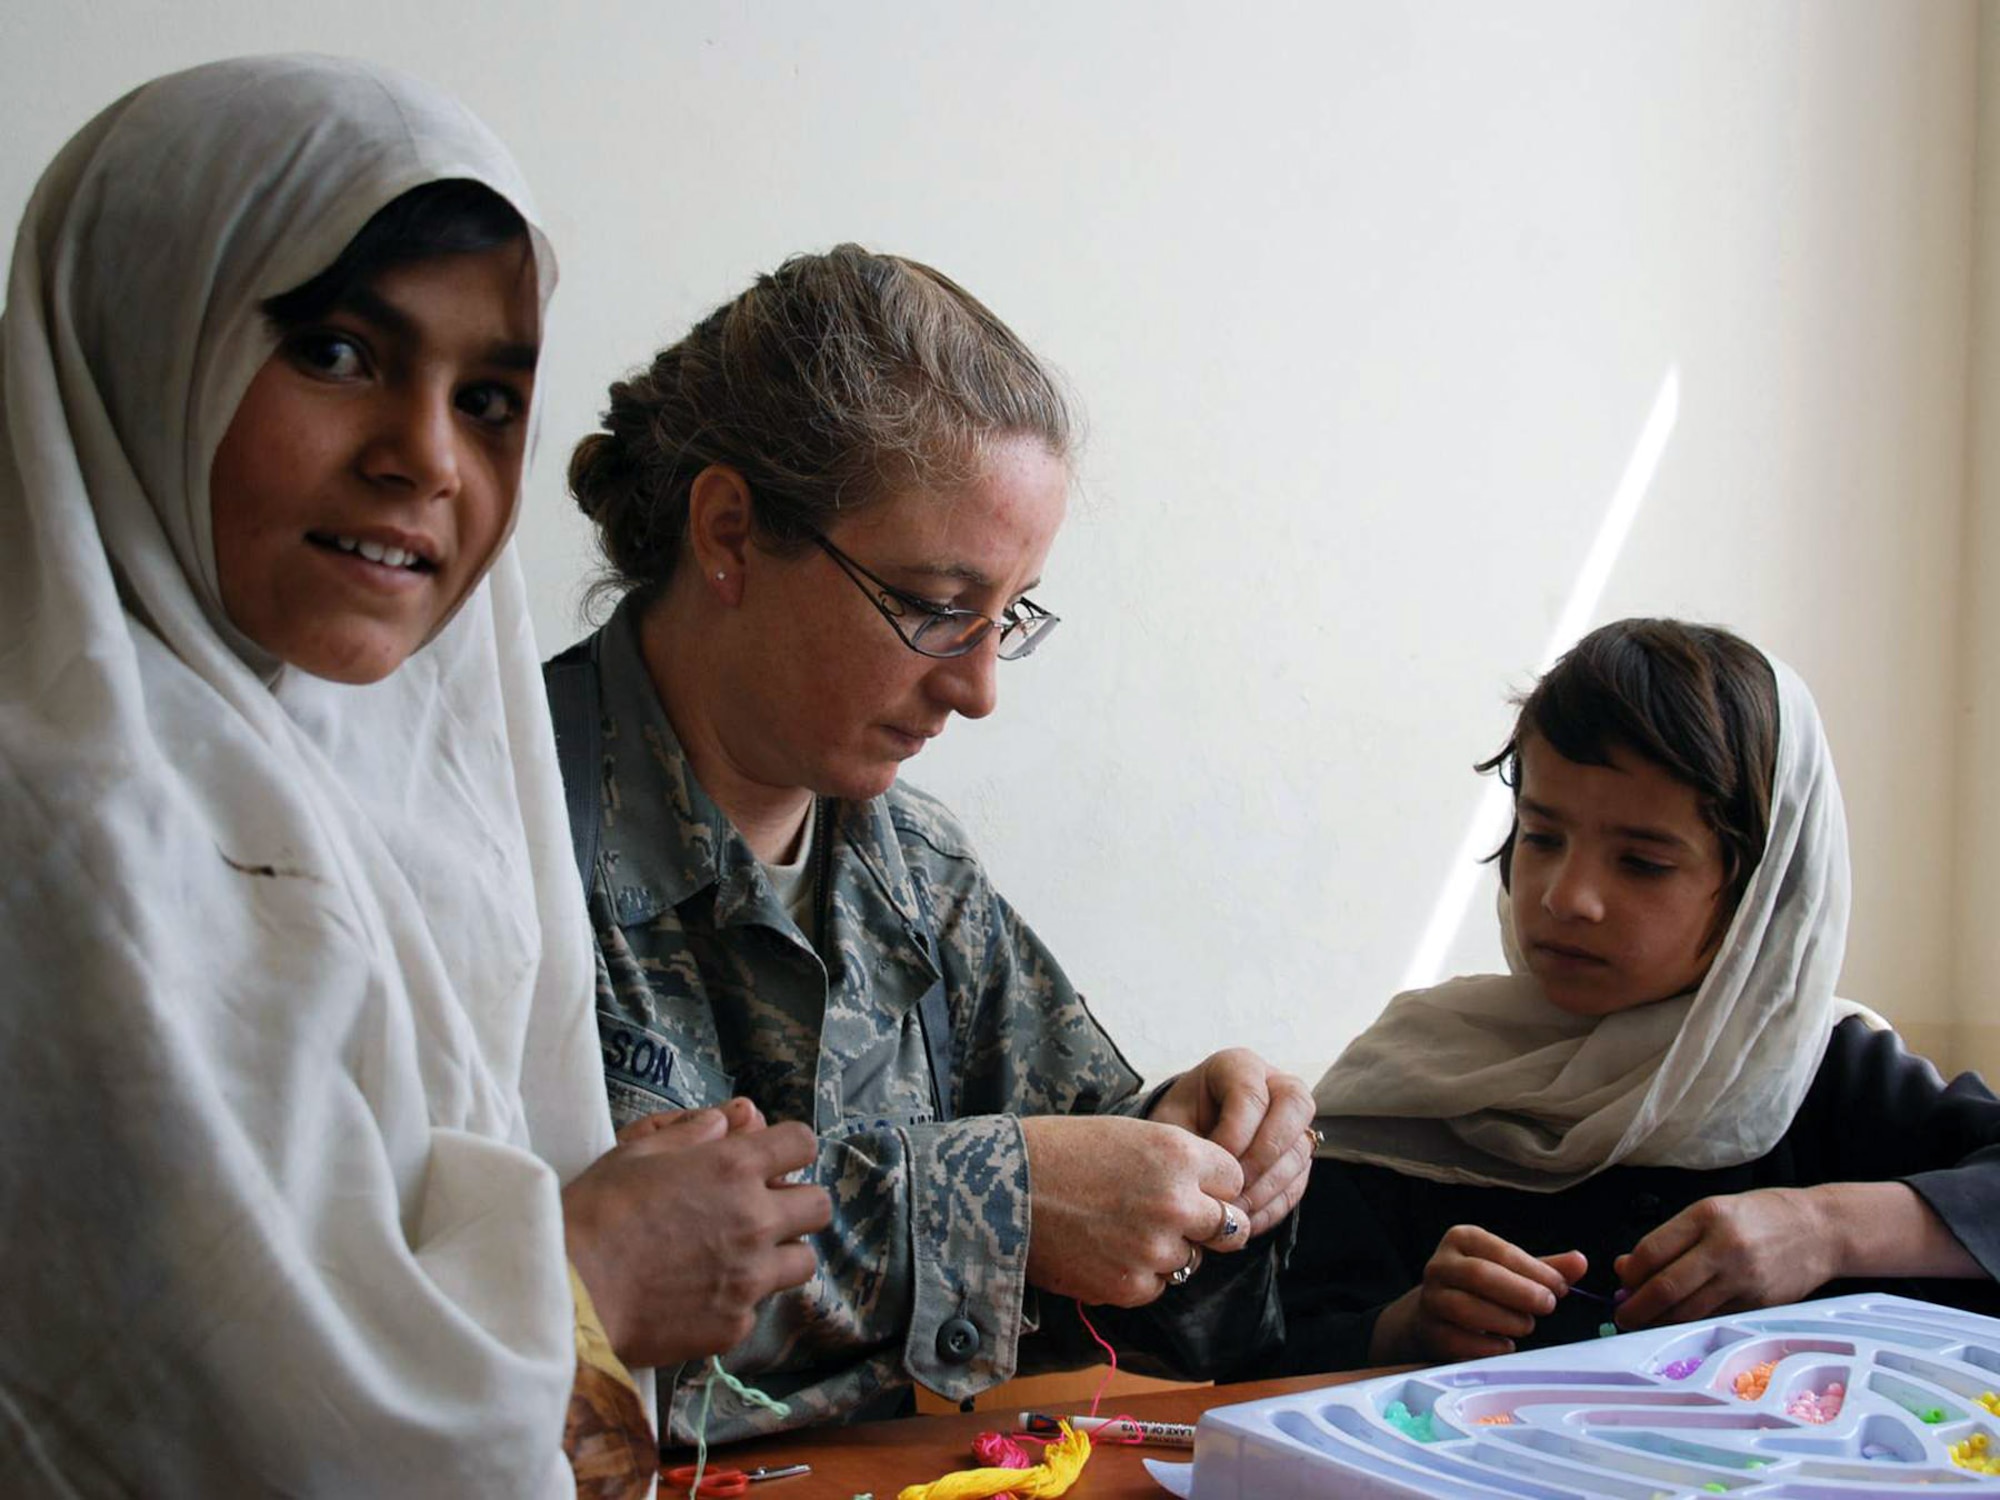 Master Sgt. Billie Wilson takes part in a volunteer community relations program trip to the Zabuli Education Center for Girls and Women May 8 in Kabul, Afghanistan. During the visit to the girls' school, nearly 70 American servicemembers from Camp Eggers delivered backpacks, toys and school supplies to the students. Sergeant Wilson is assigned to the of Command Securities Transition Command-Afghanistan. (U.S. Navy photo)

